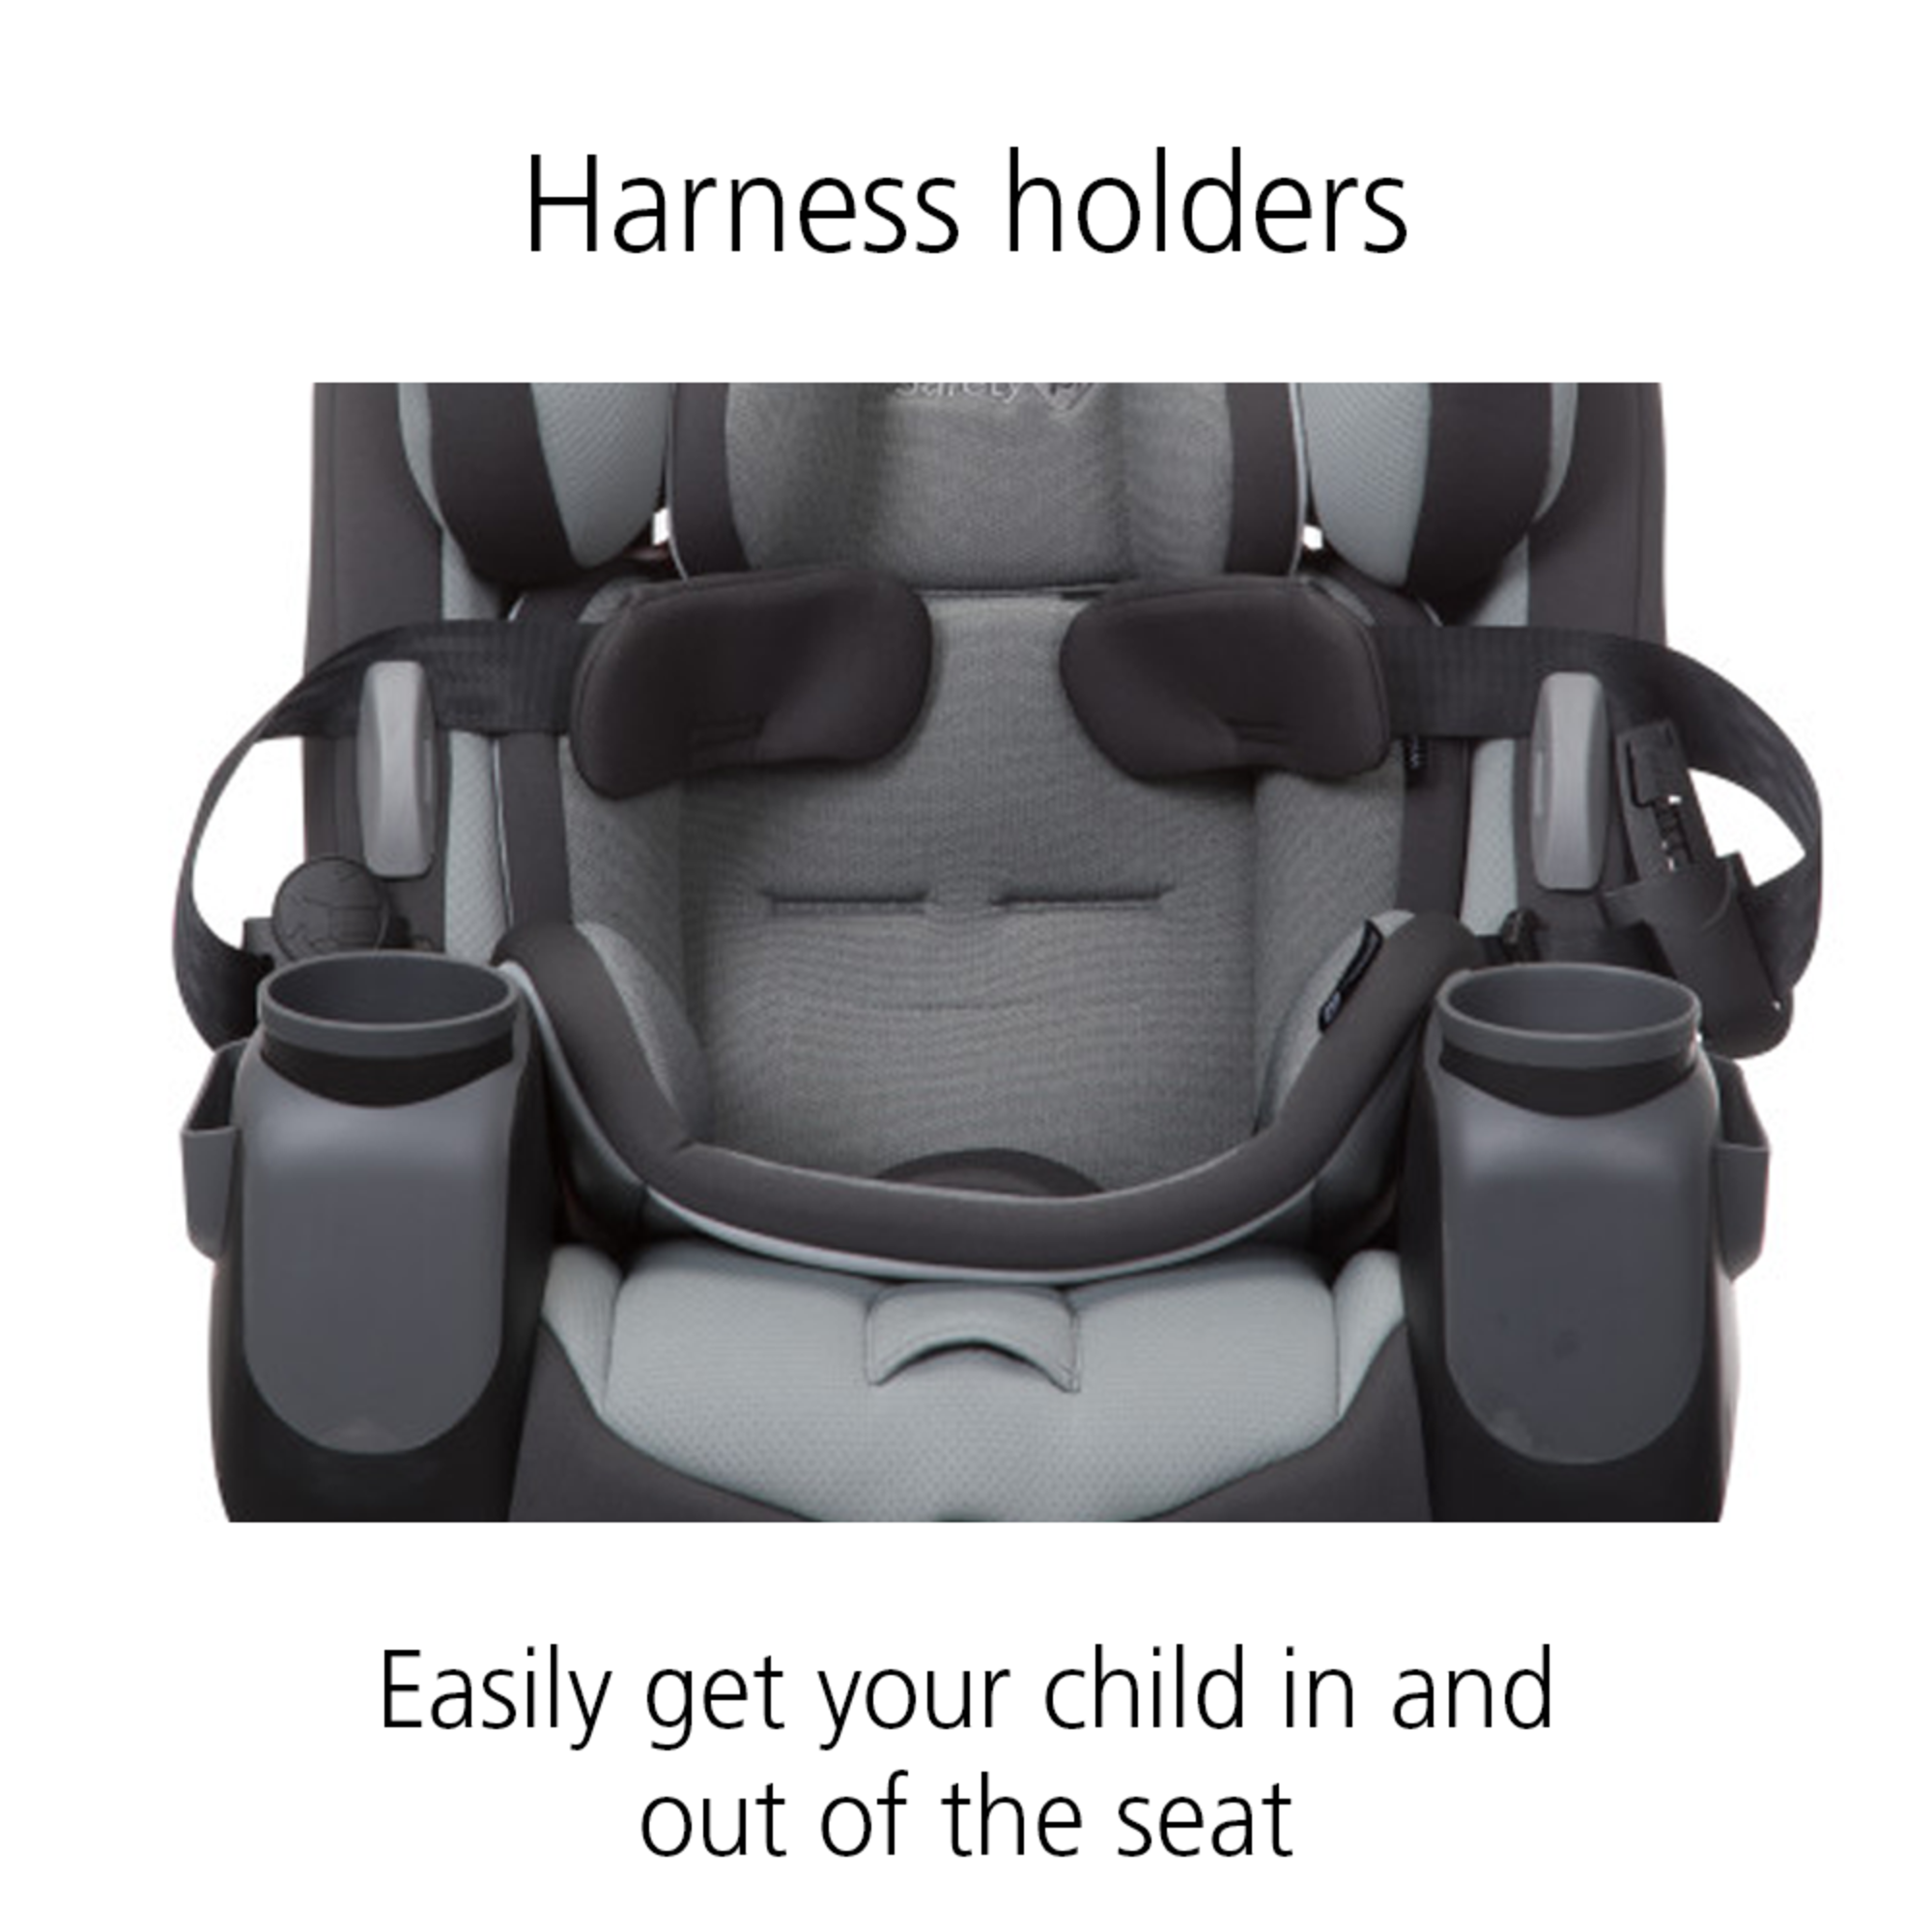 Harness holders. Easily get your child in and out of seat.